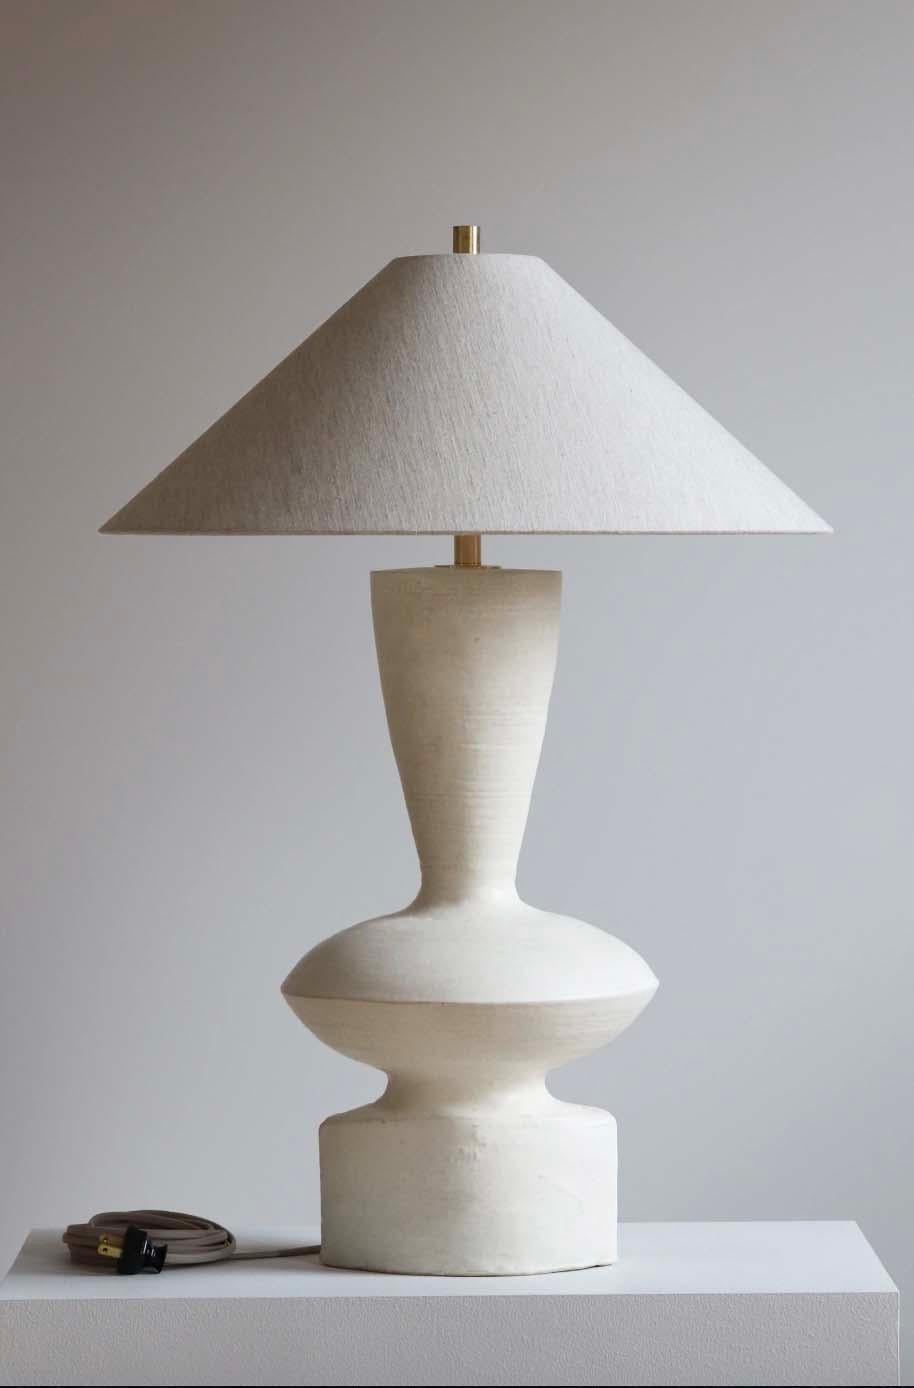 The Luna lamp is handmade studio pottery by ceramic artist by Danny Kaplan. Shade included. Please note exact dimensions may vary.

Born in New York City and raised in Aix-en-Provence, France, Danny Kaplan’s passion for ceramics was shaped by early